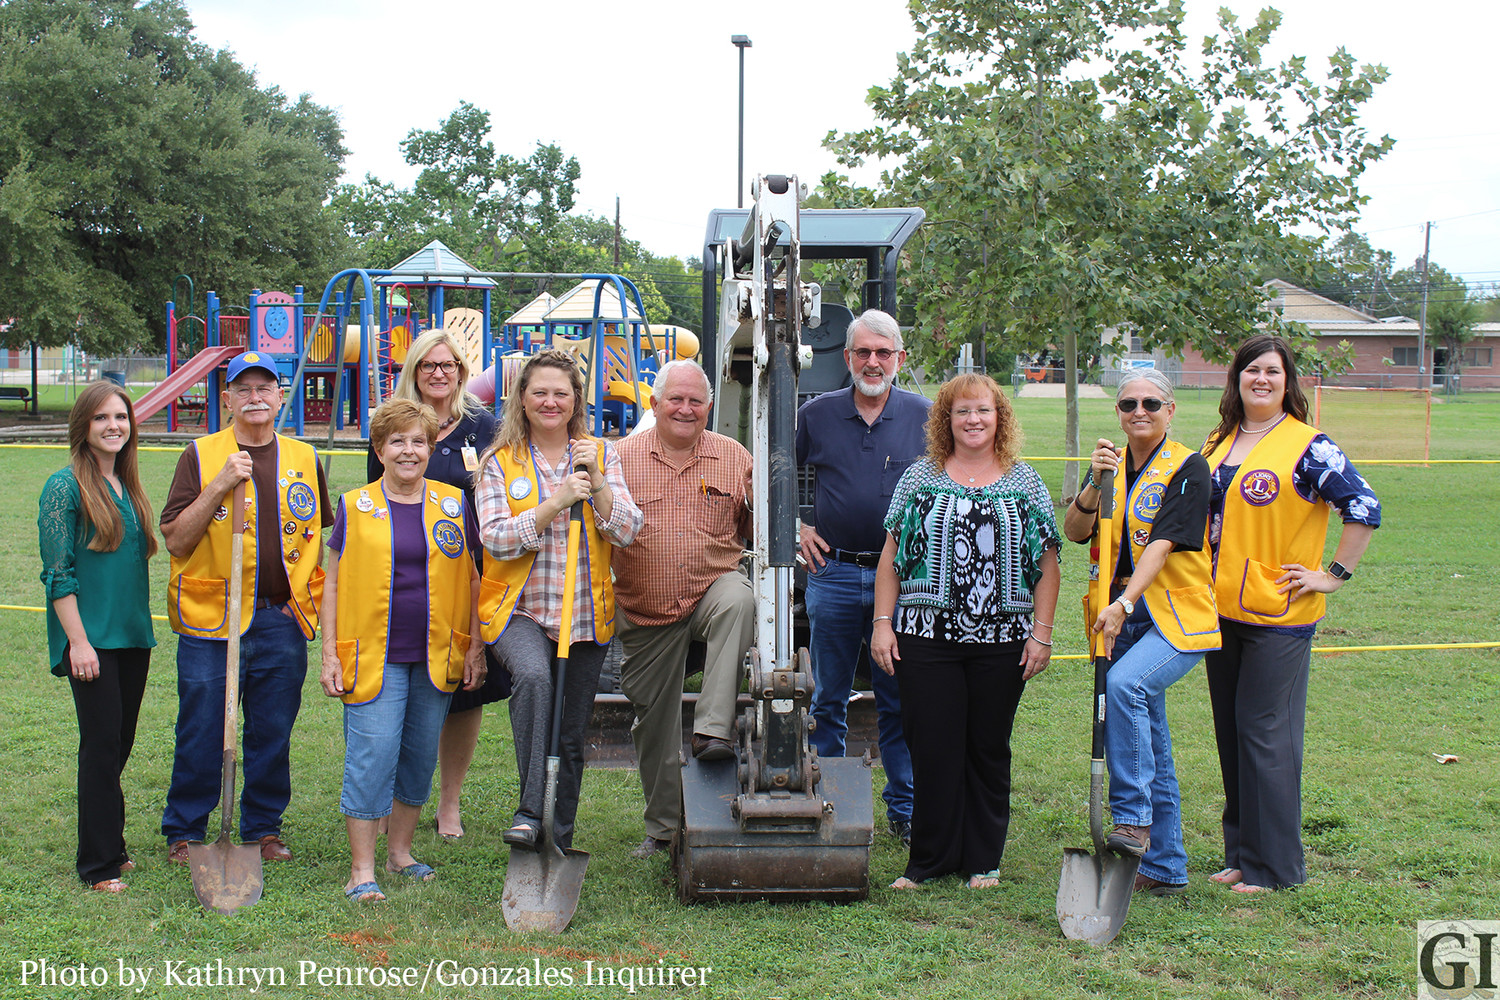 After two years of planning and fundraising efforts to build a splash pad at Lions Park, the Gonzales Noon Lions have broken ground on the highly-anticipated project. Construction on the pad should take two to three weeks, weather providing.